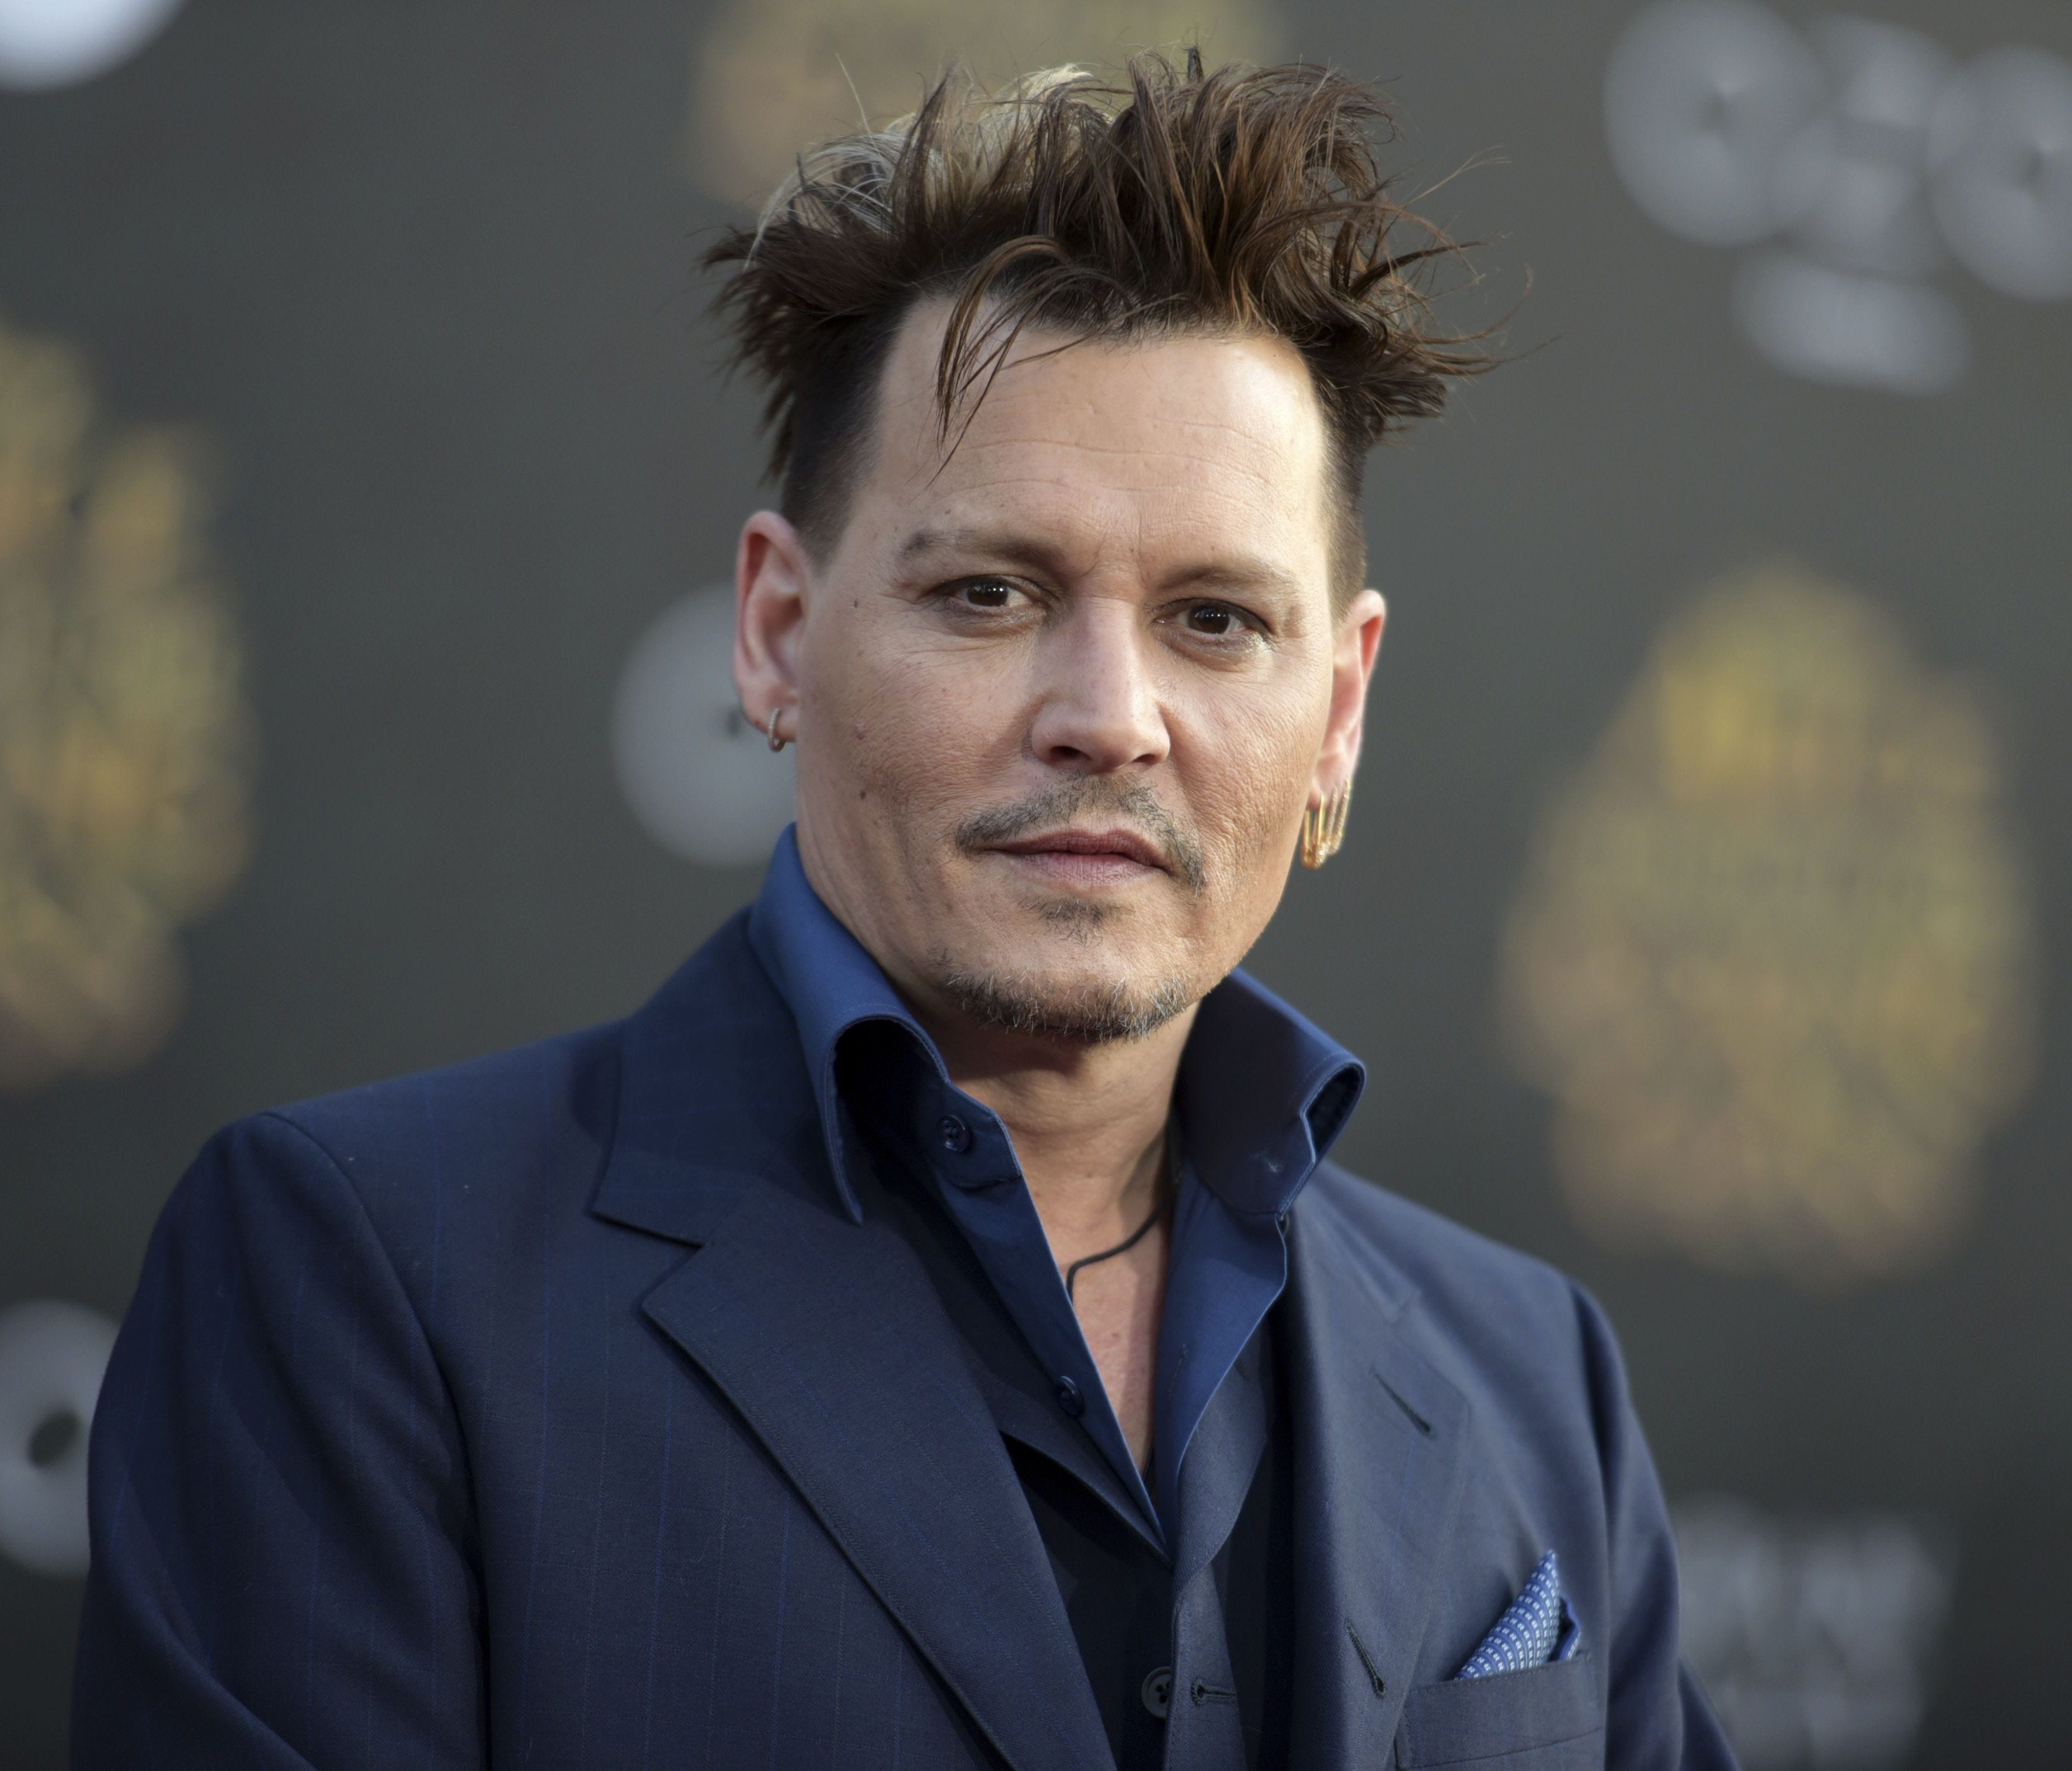 Johnny Depp's former business managers countersued the actor on Tuesday.